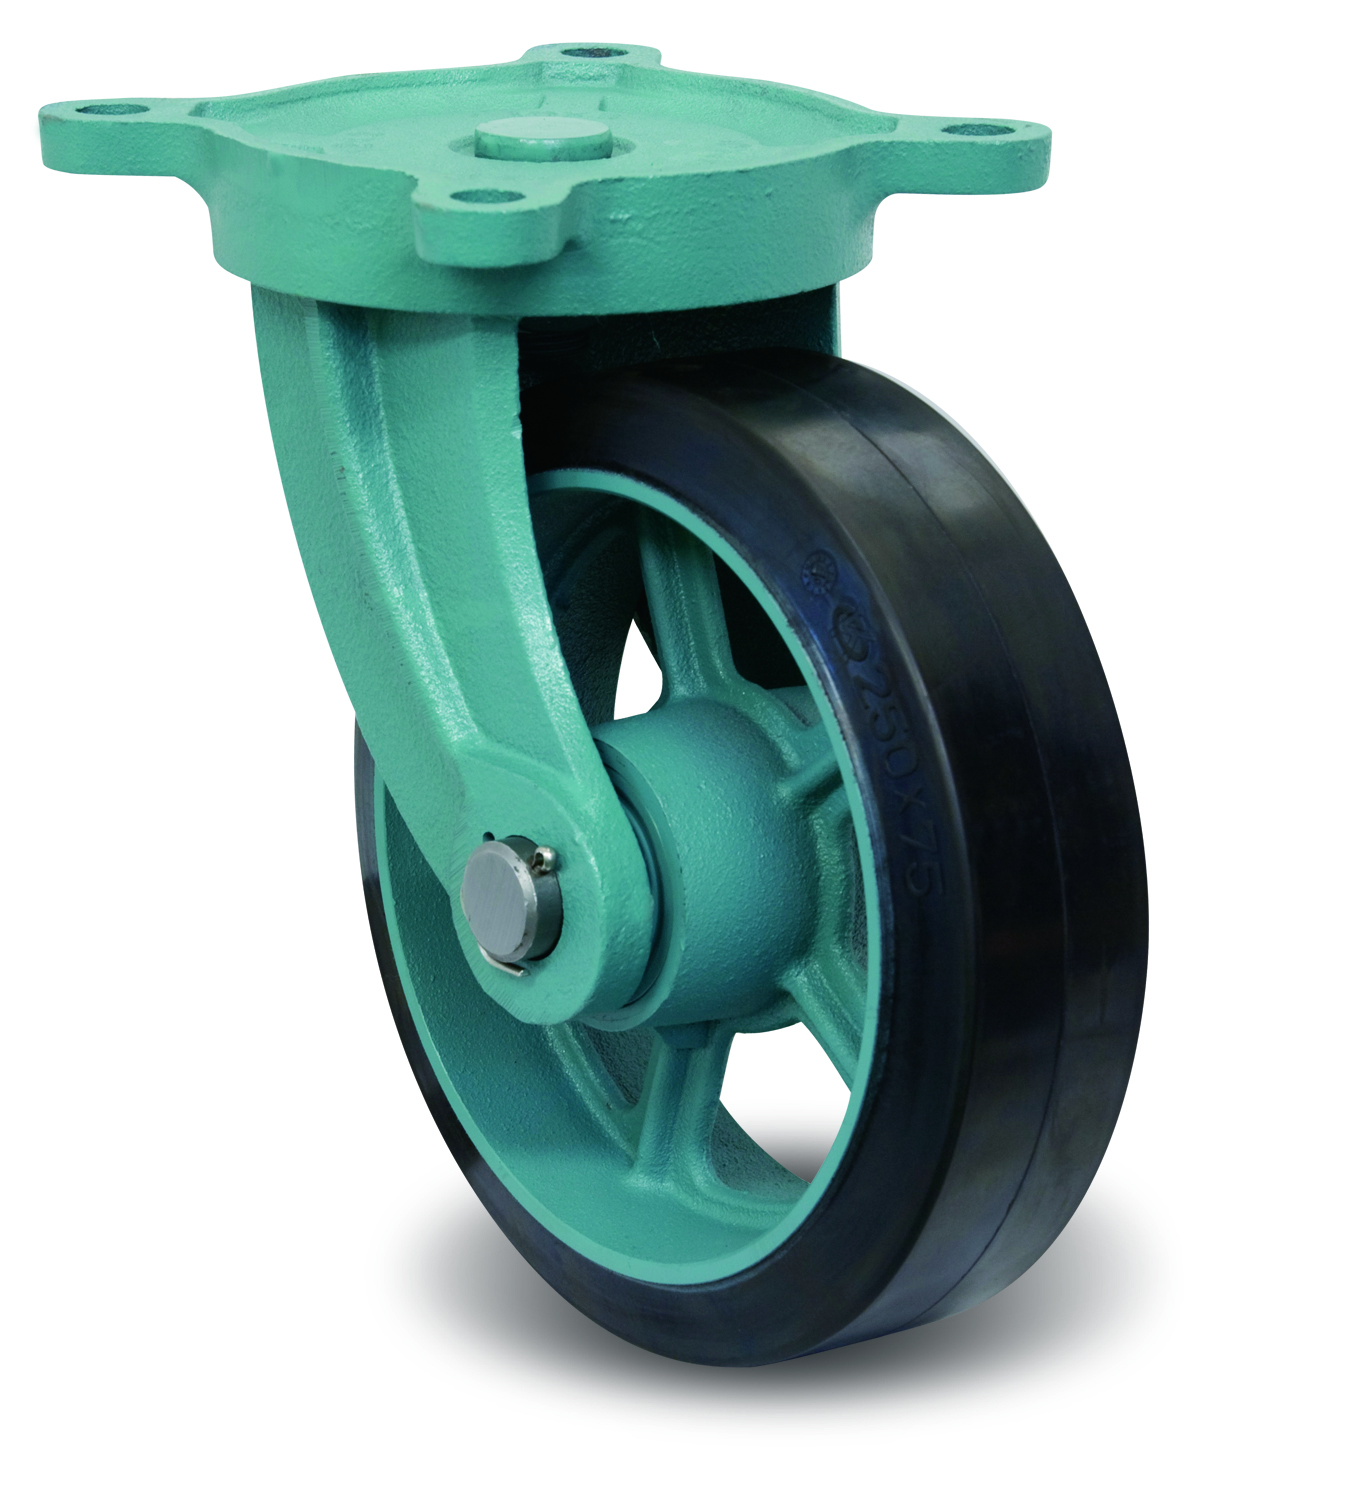 Casters - Rubber with Ductile Steel Swivel Plate, MG-O Series with Bracket, E/MG-O Series. EMG-O130X65